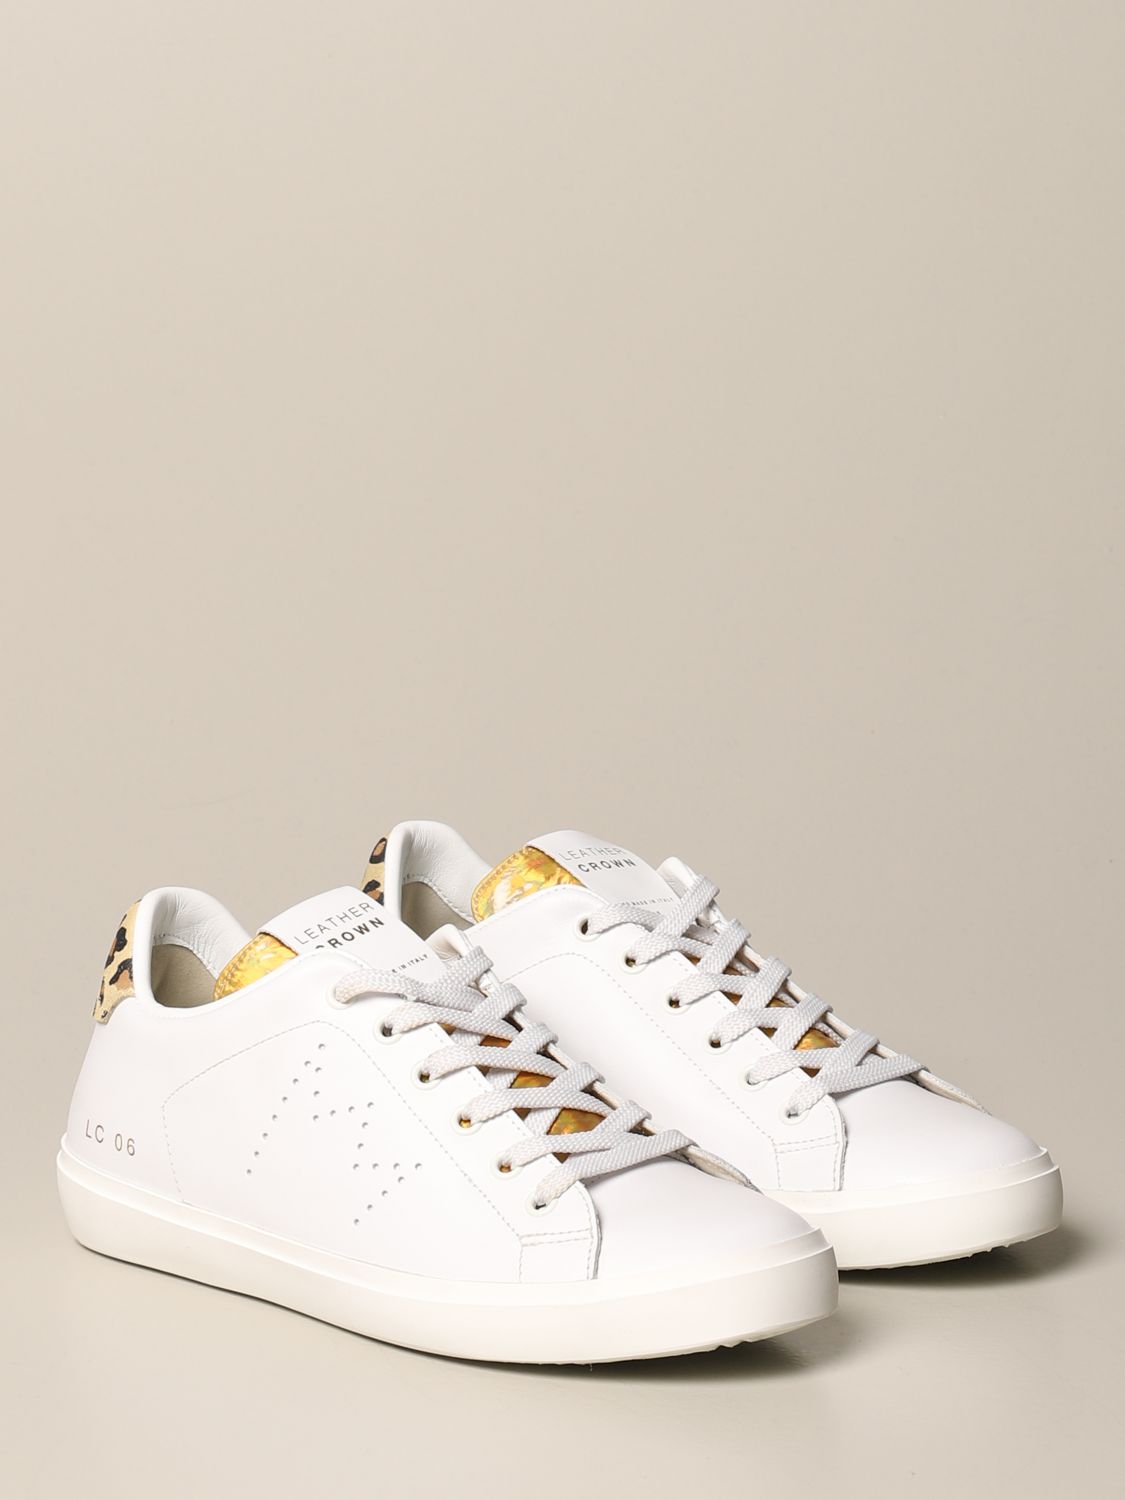 leather crown womens sneakers